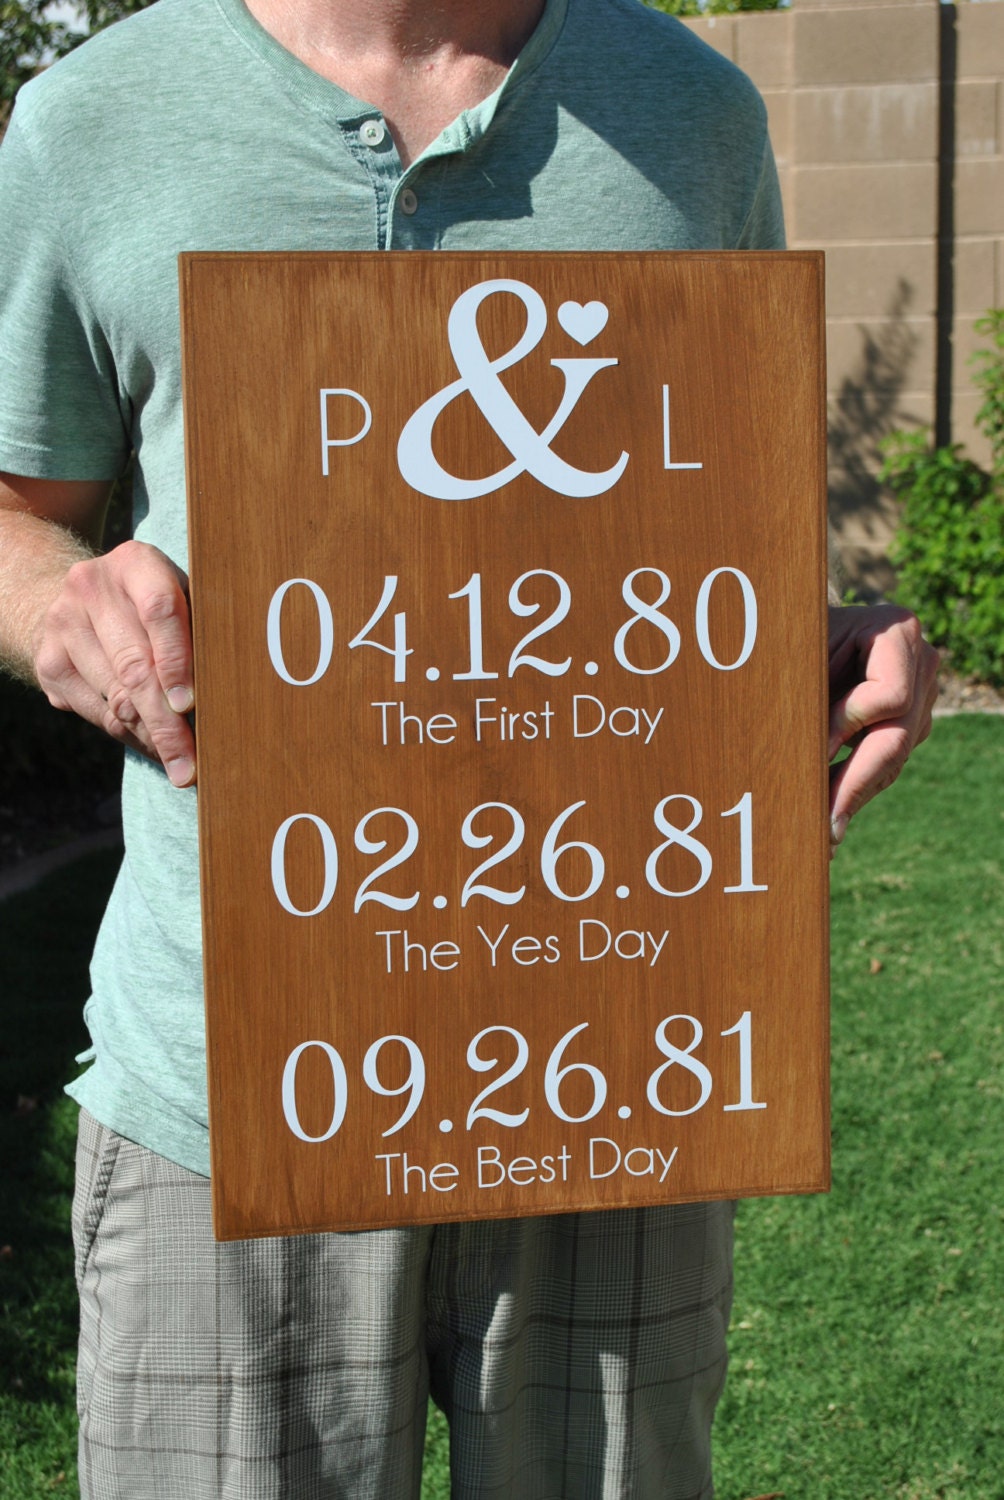 One Year Anniversary Gifts
 Rustic e Year Anniversary t for by SignsToLiveBy on Etsy